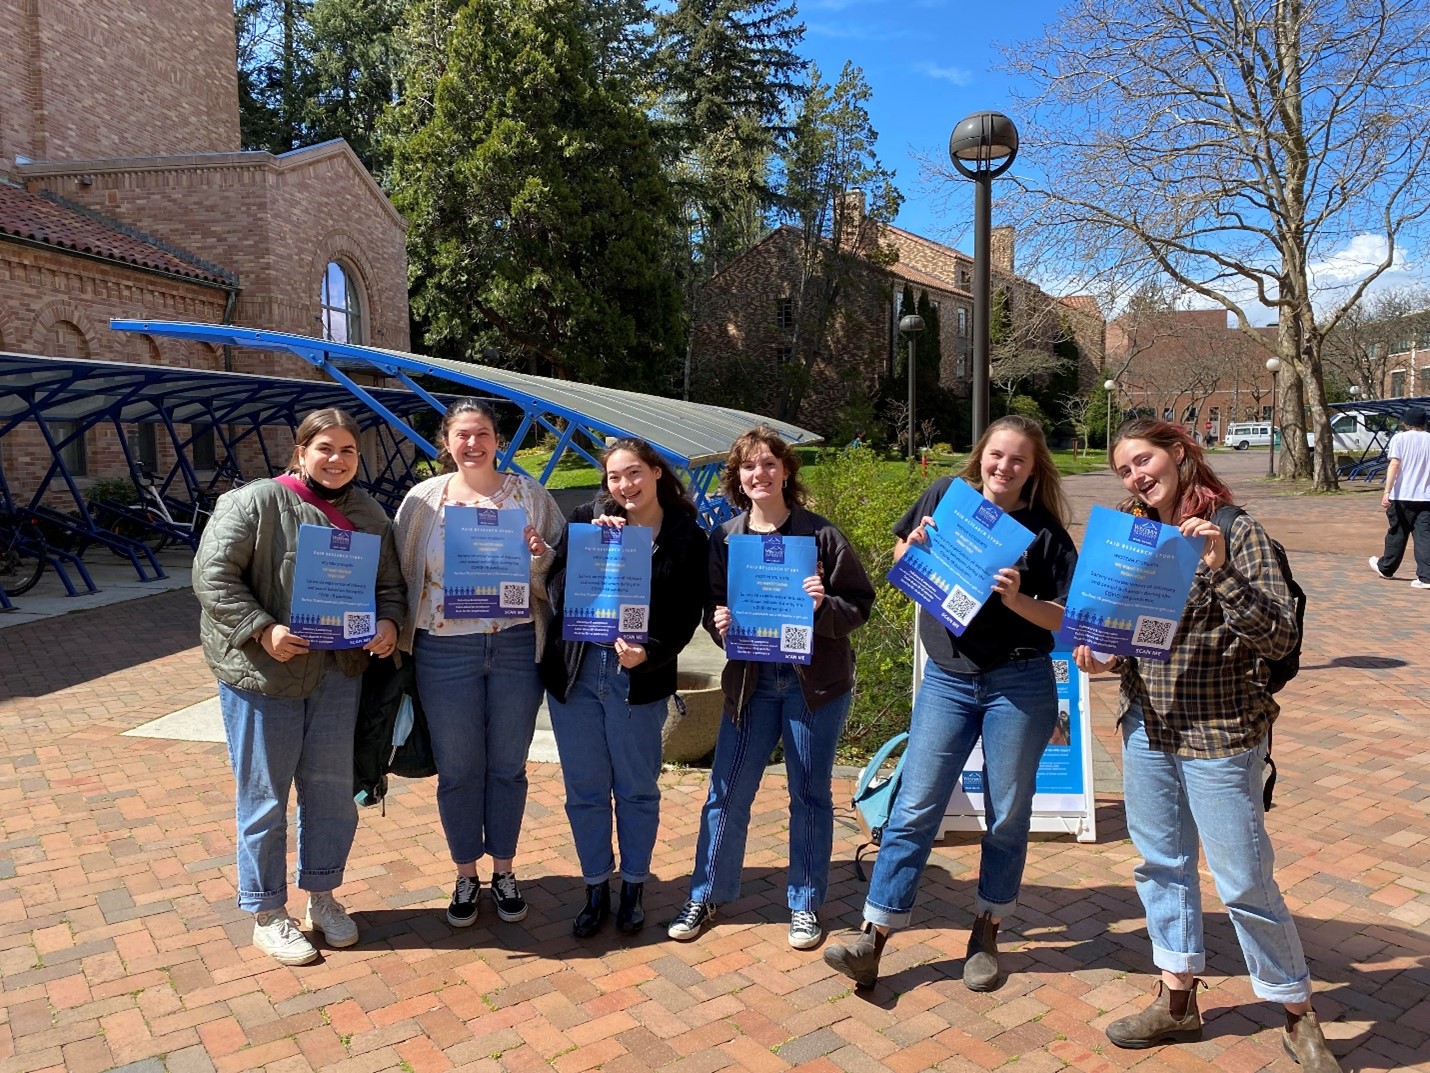 Six students holding blue posters and smiling